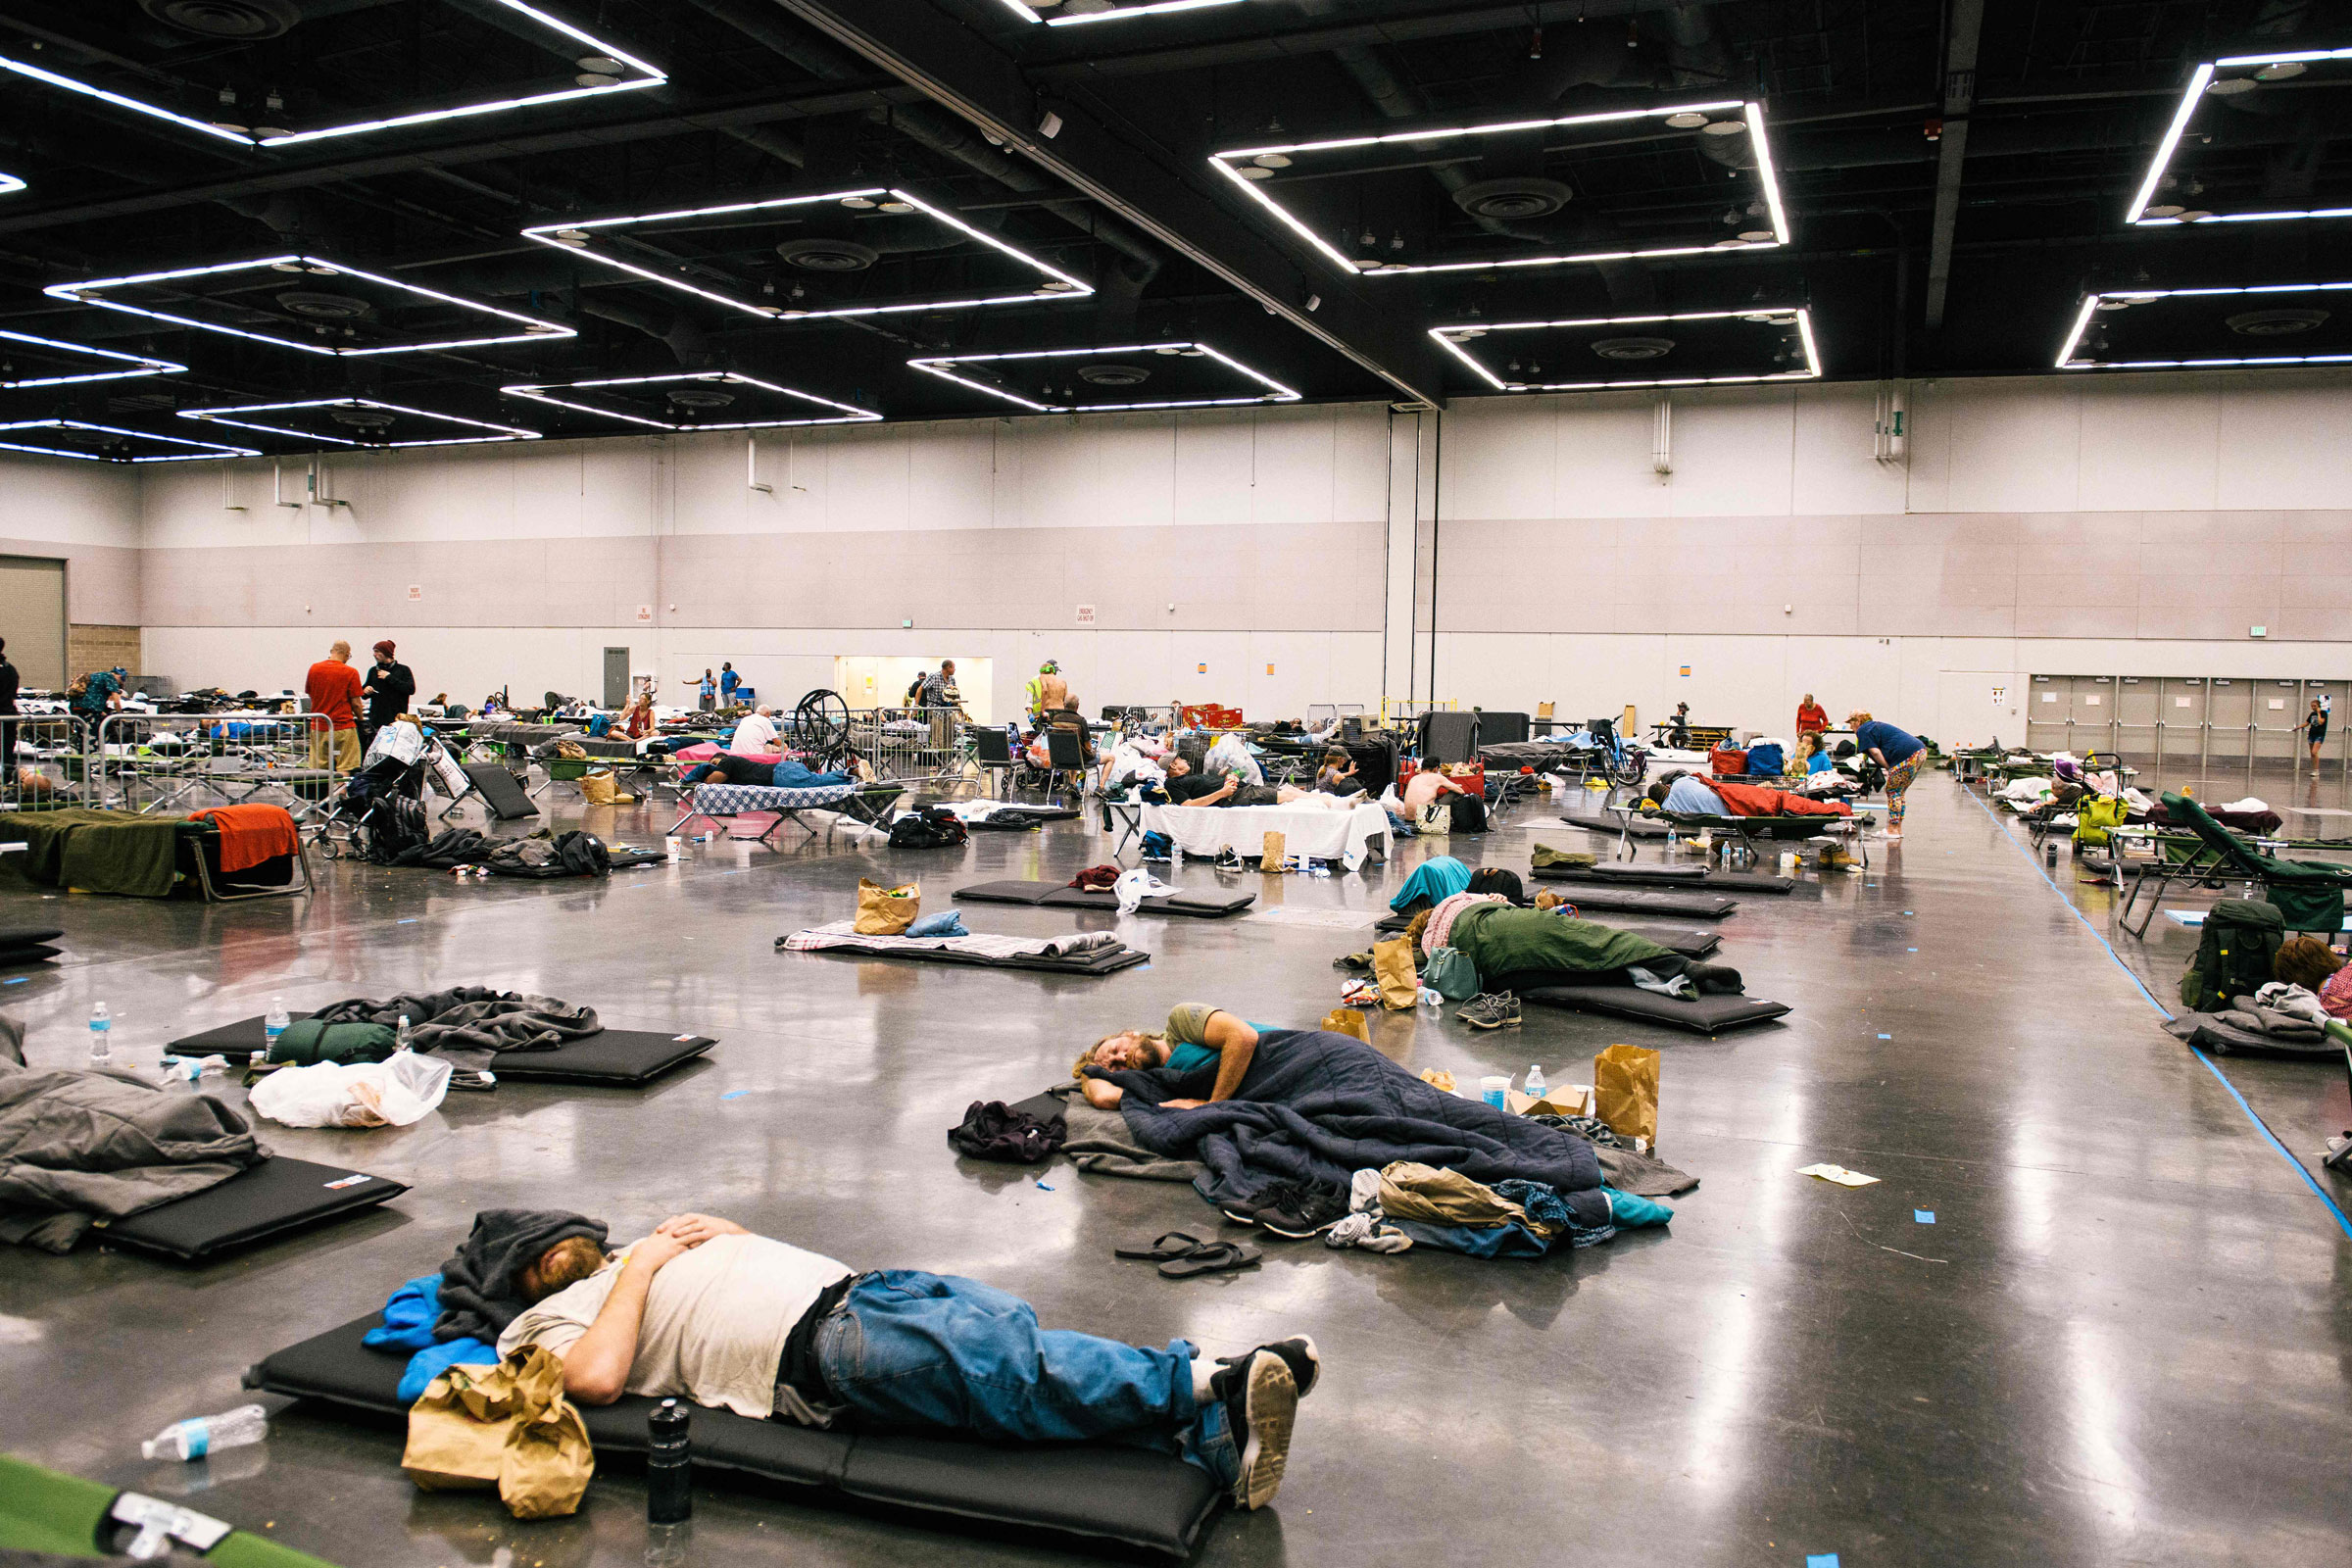 People rest at the Oregon Convention Center cooling station in Portland, Ore., on June 28, 2021, as a heatwave moves over much of the United States. (Kathryn Elsesser—AFP/Getty Images)